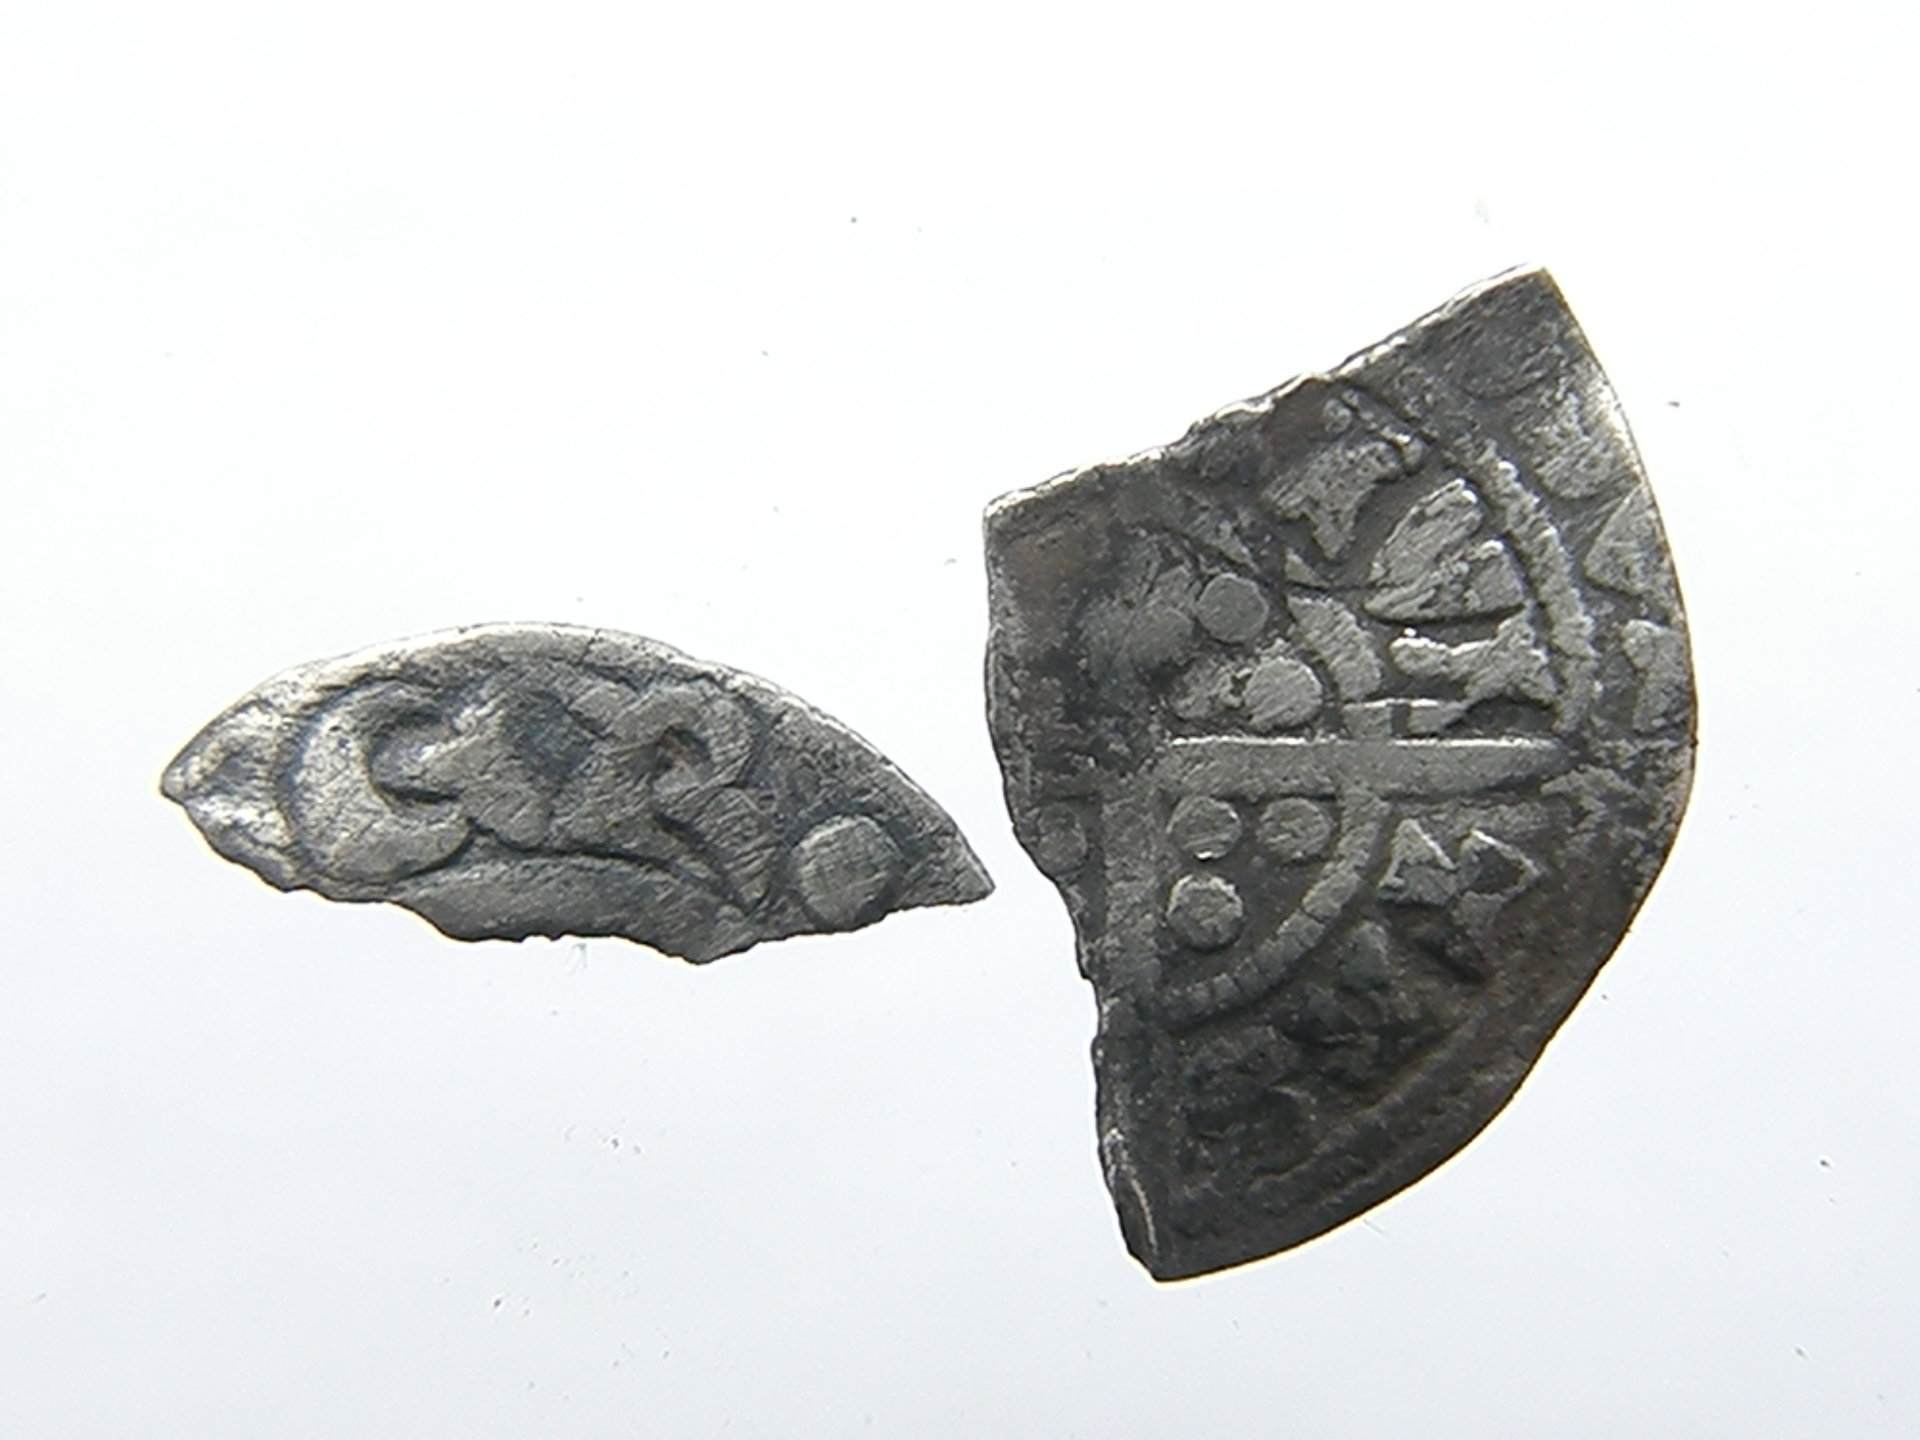 reverse of groat and penny.JPG